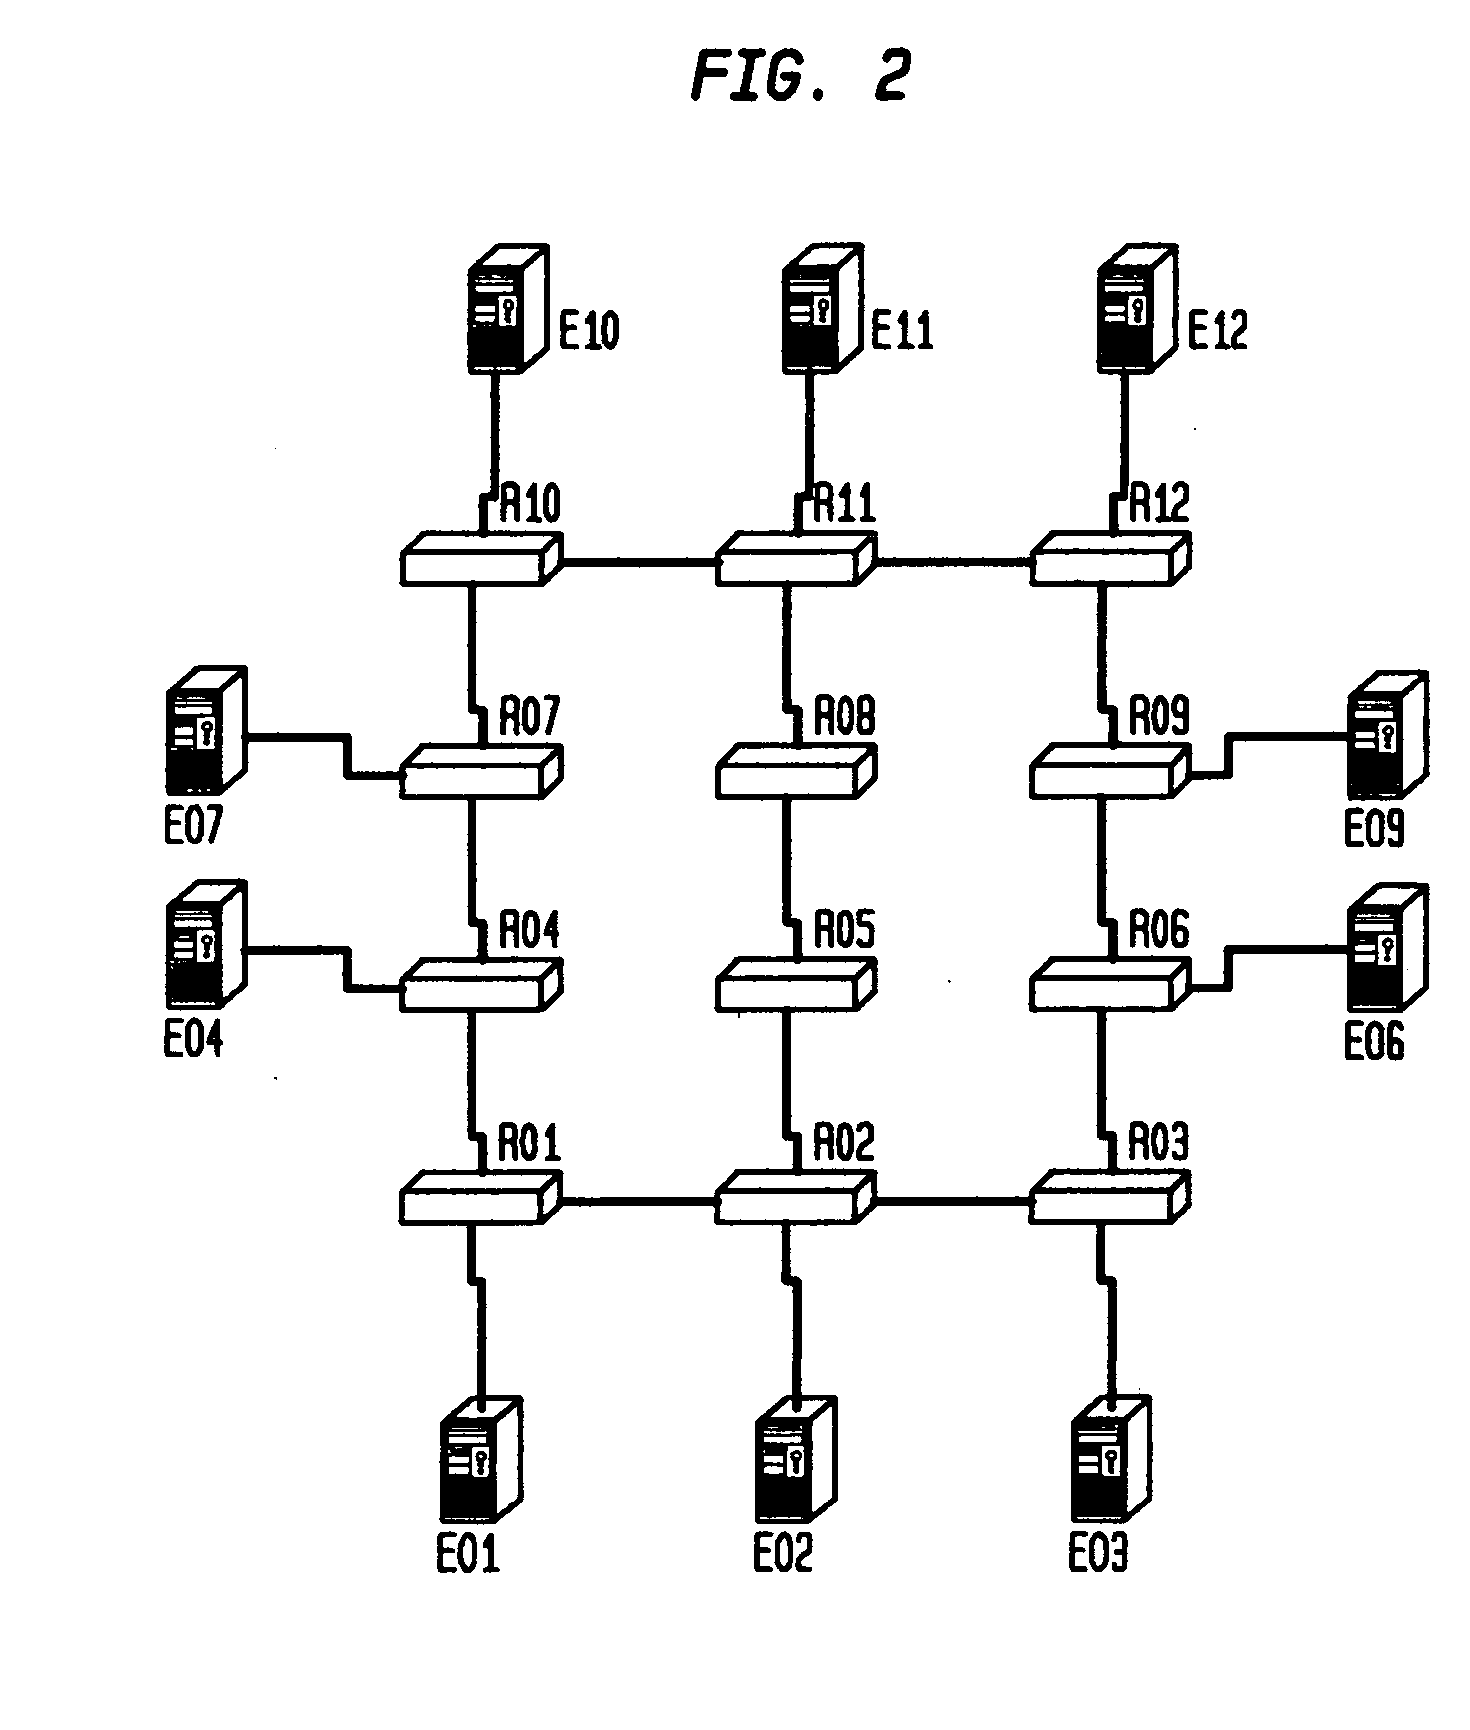 Method and apparatus for determining monitoring locations in distributed systems